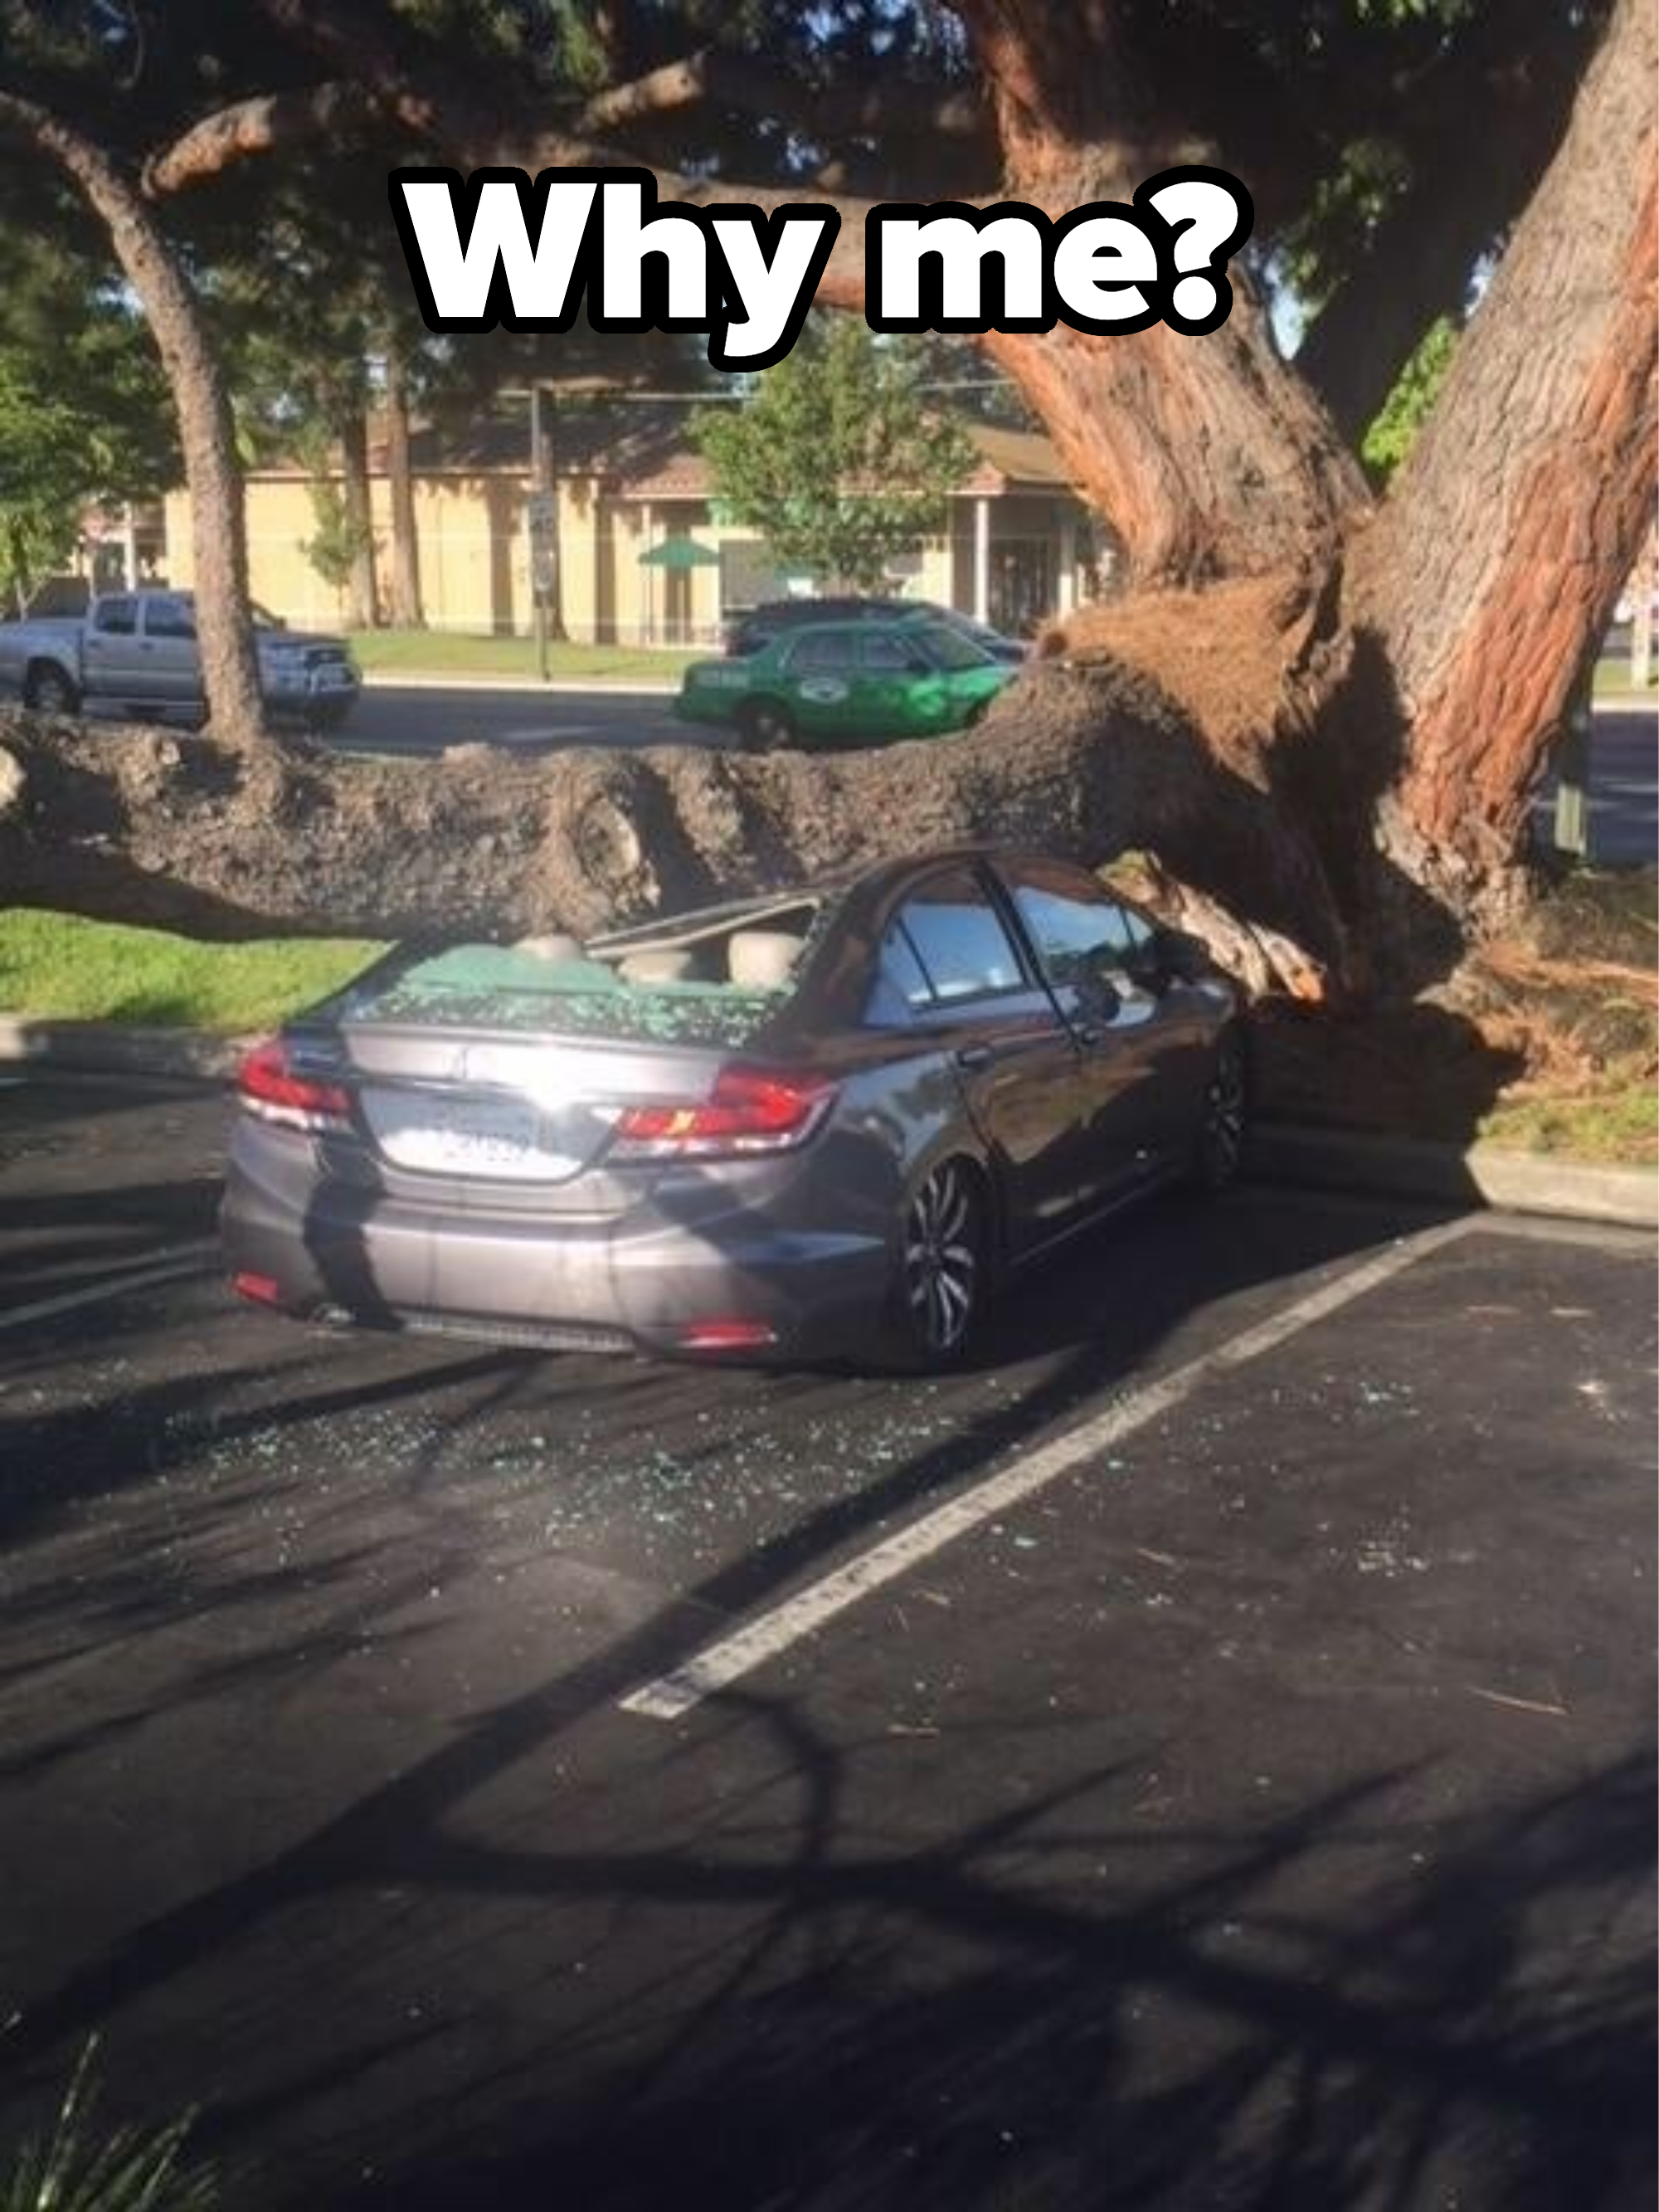 A car crushed by a tree, with caption &quot;Why me?&quot;